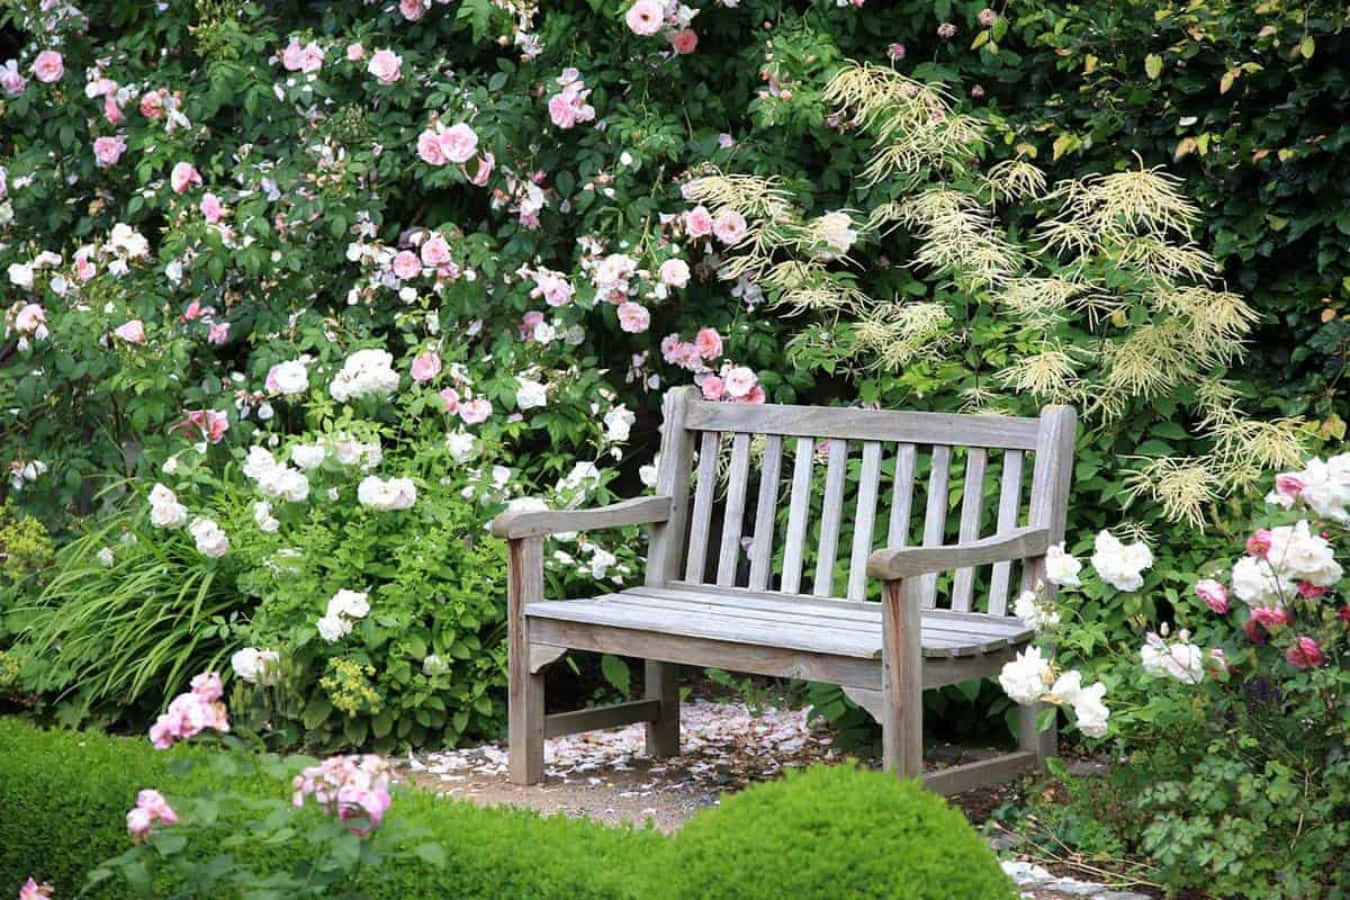 Take a break and relax with a classic park bench.